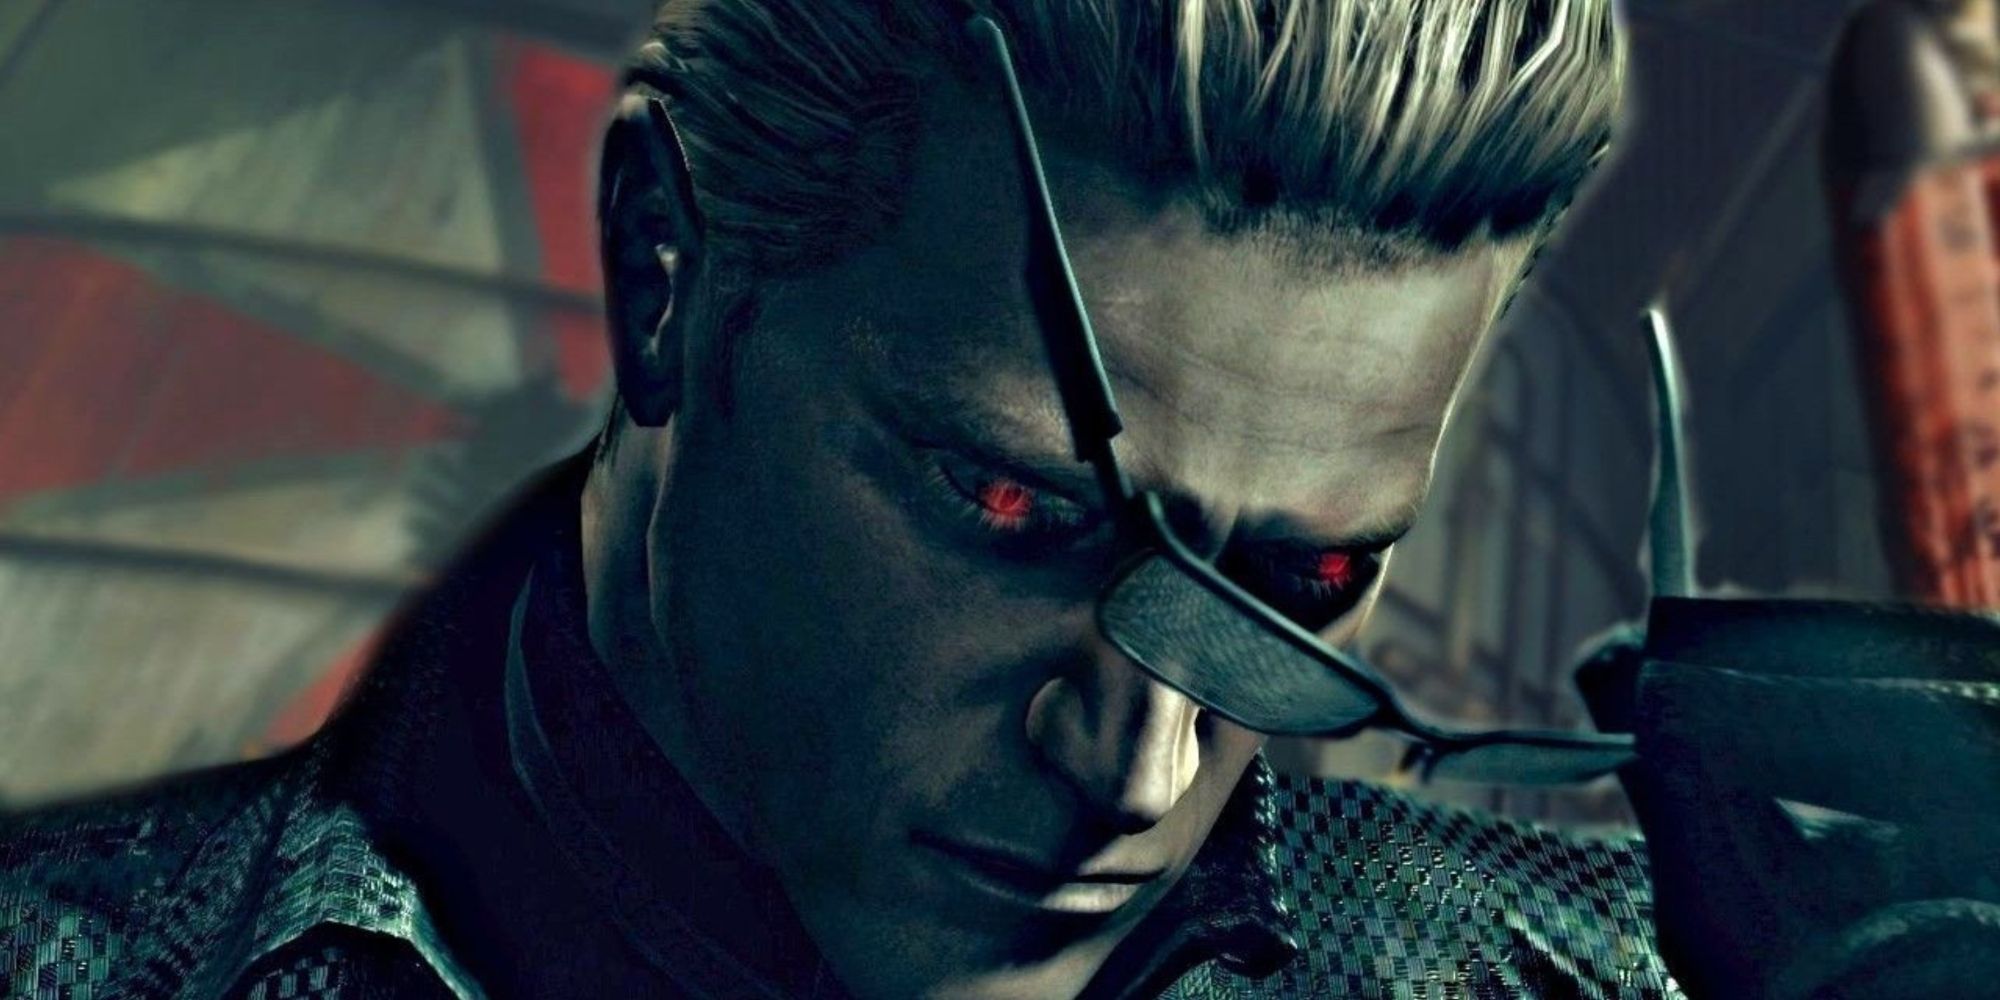 Wesker Removing His Sunglasses to Reveal His Red Eyes in Resident Evil 5.